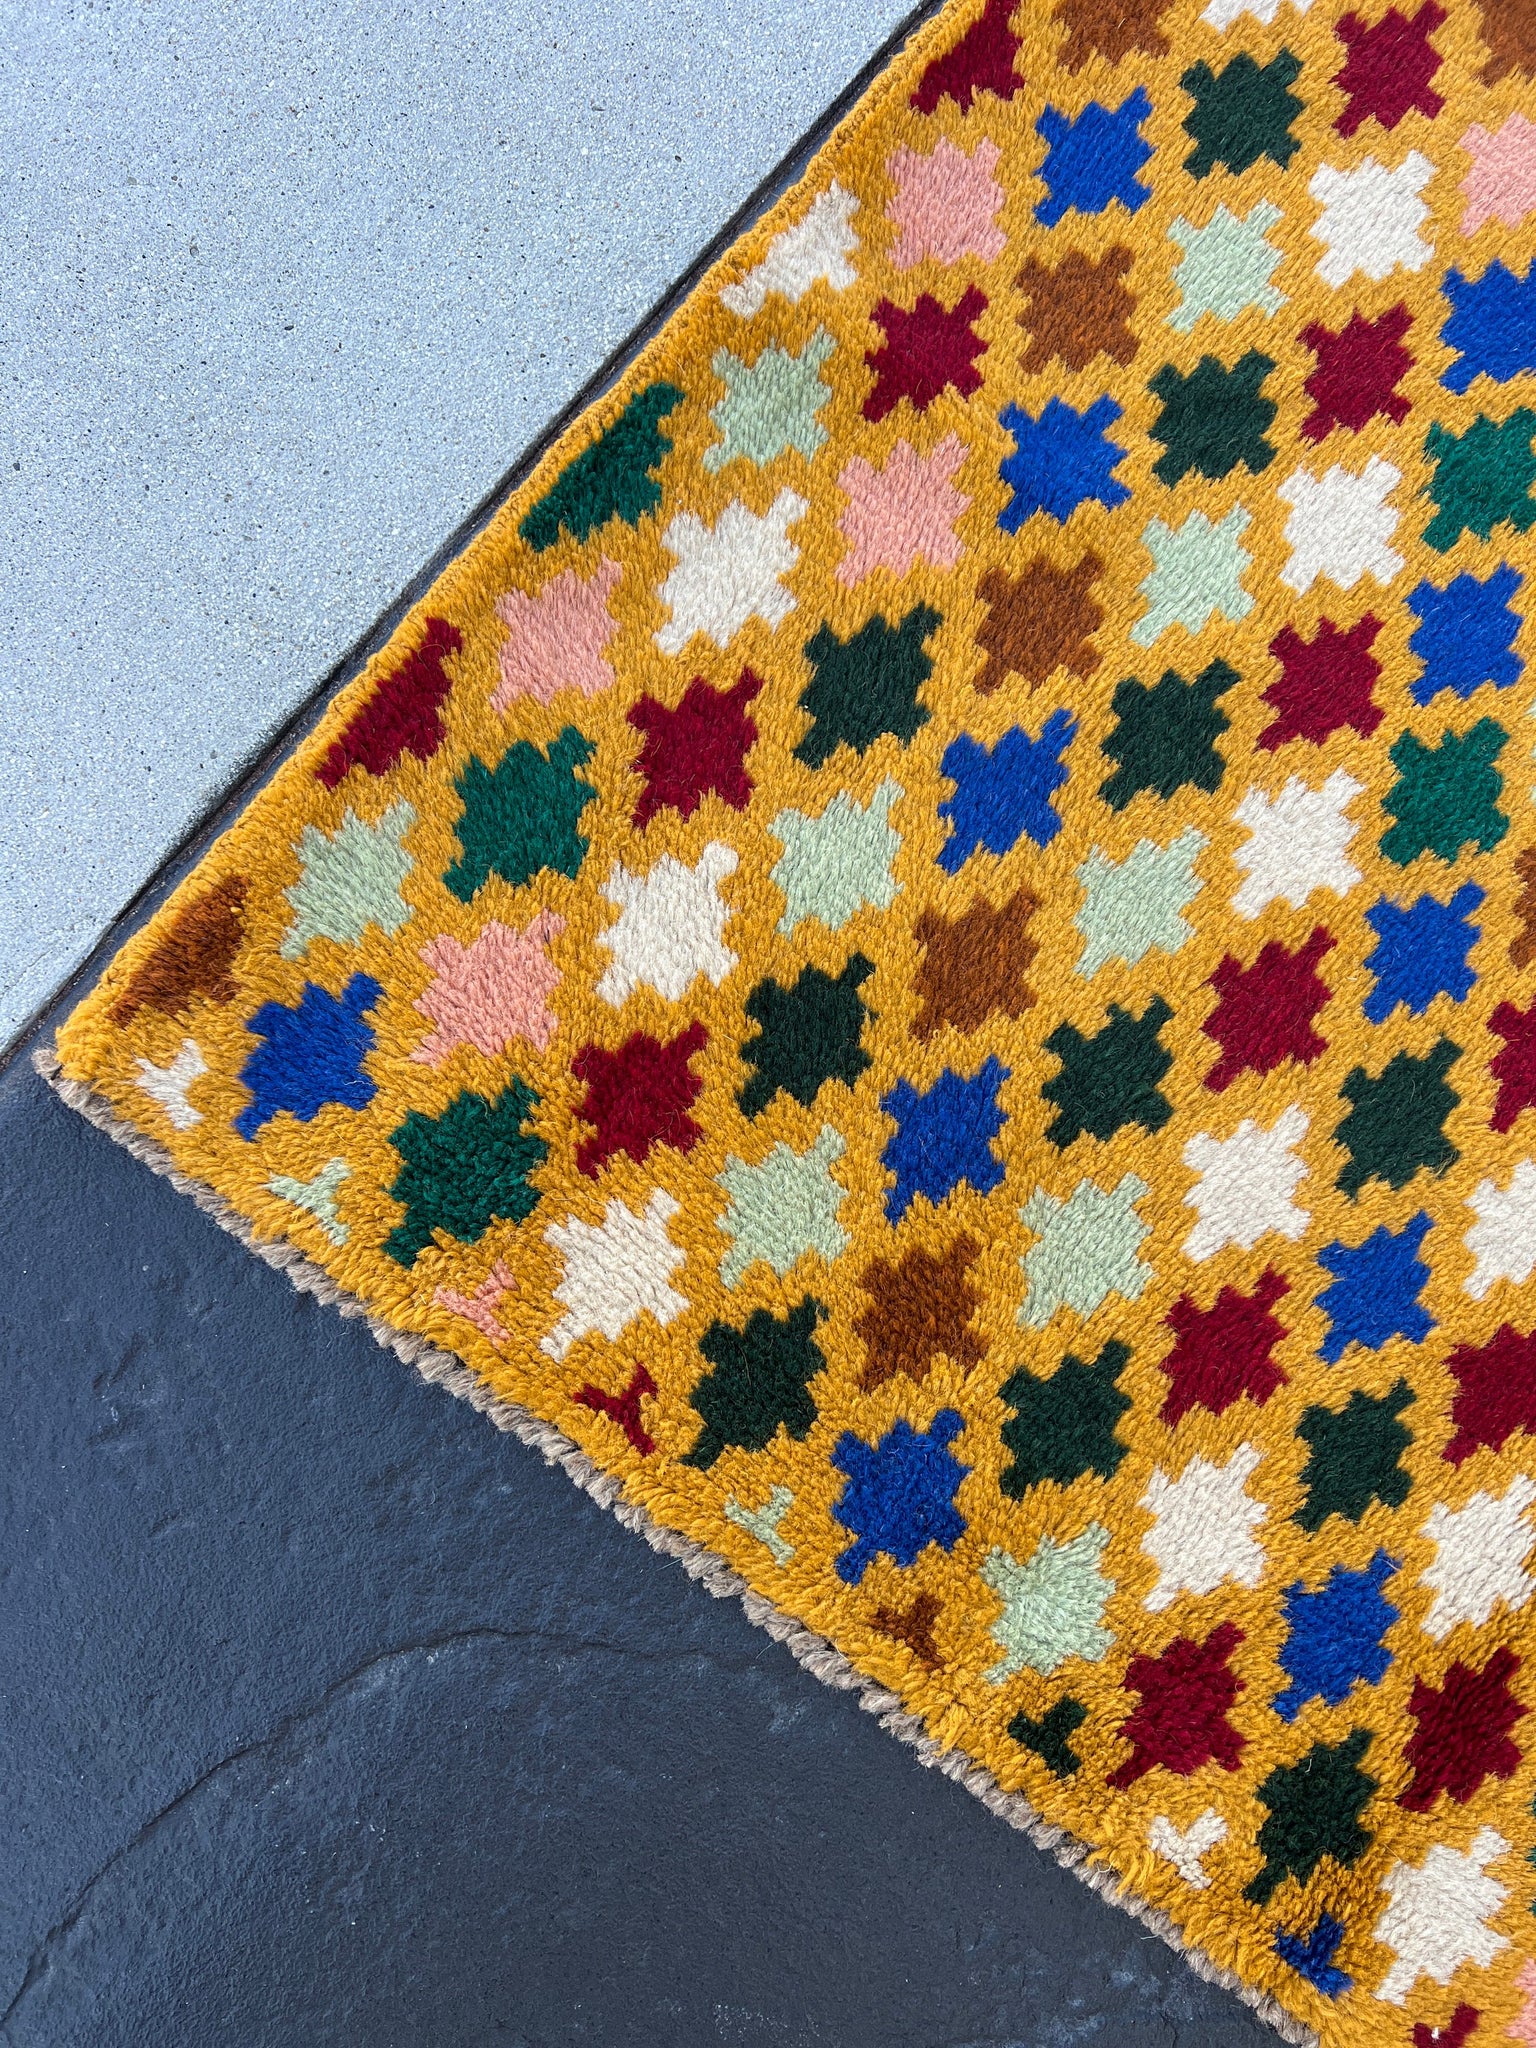 4x6 (120x185) Handmade Vintage Baluch Afghan Rug | Golden Yellow Turquoise Blue Crimson Red Ivory Chocolate Brown Pine Green Rose Pink Wool